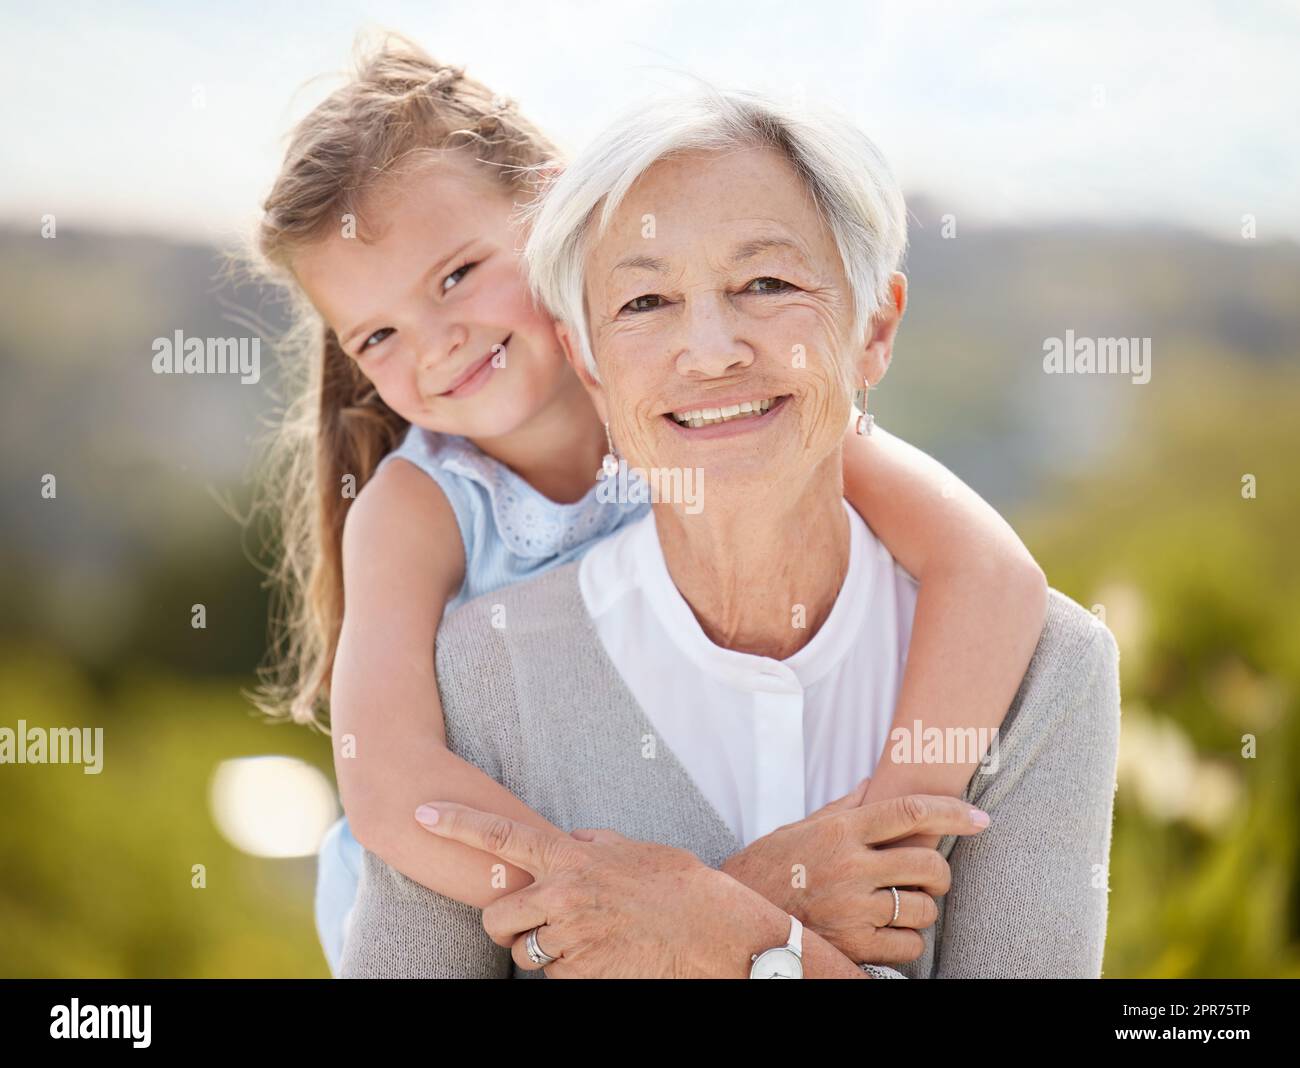 All happy families are alike. Shot of an elderly woman spending time outdoors with her granddaughter. Stock Photo